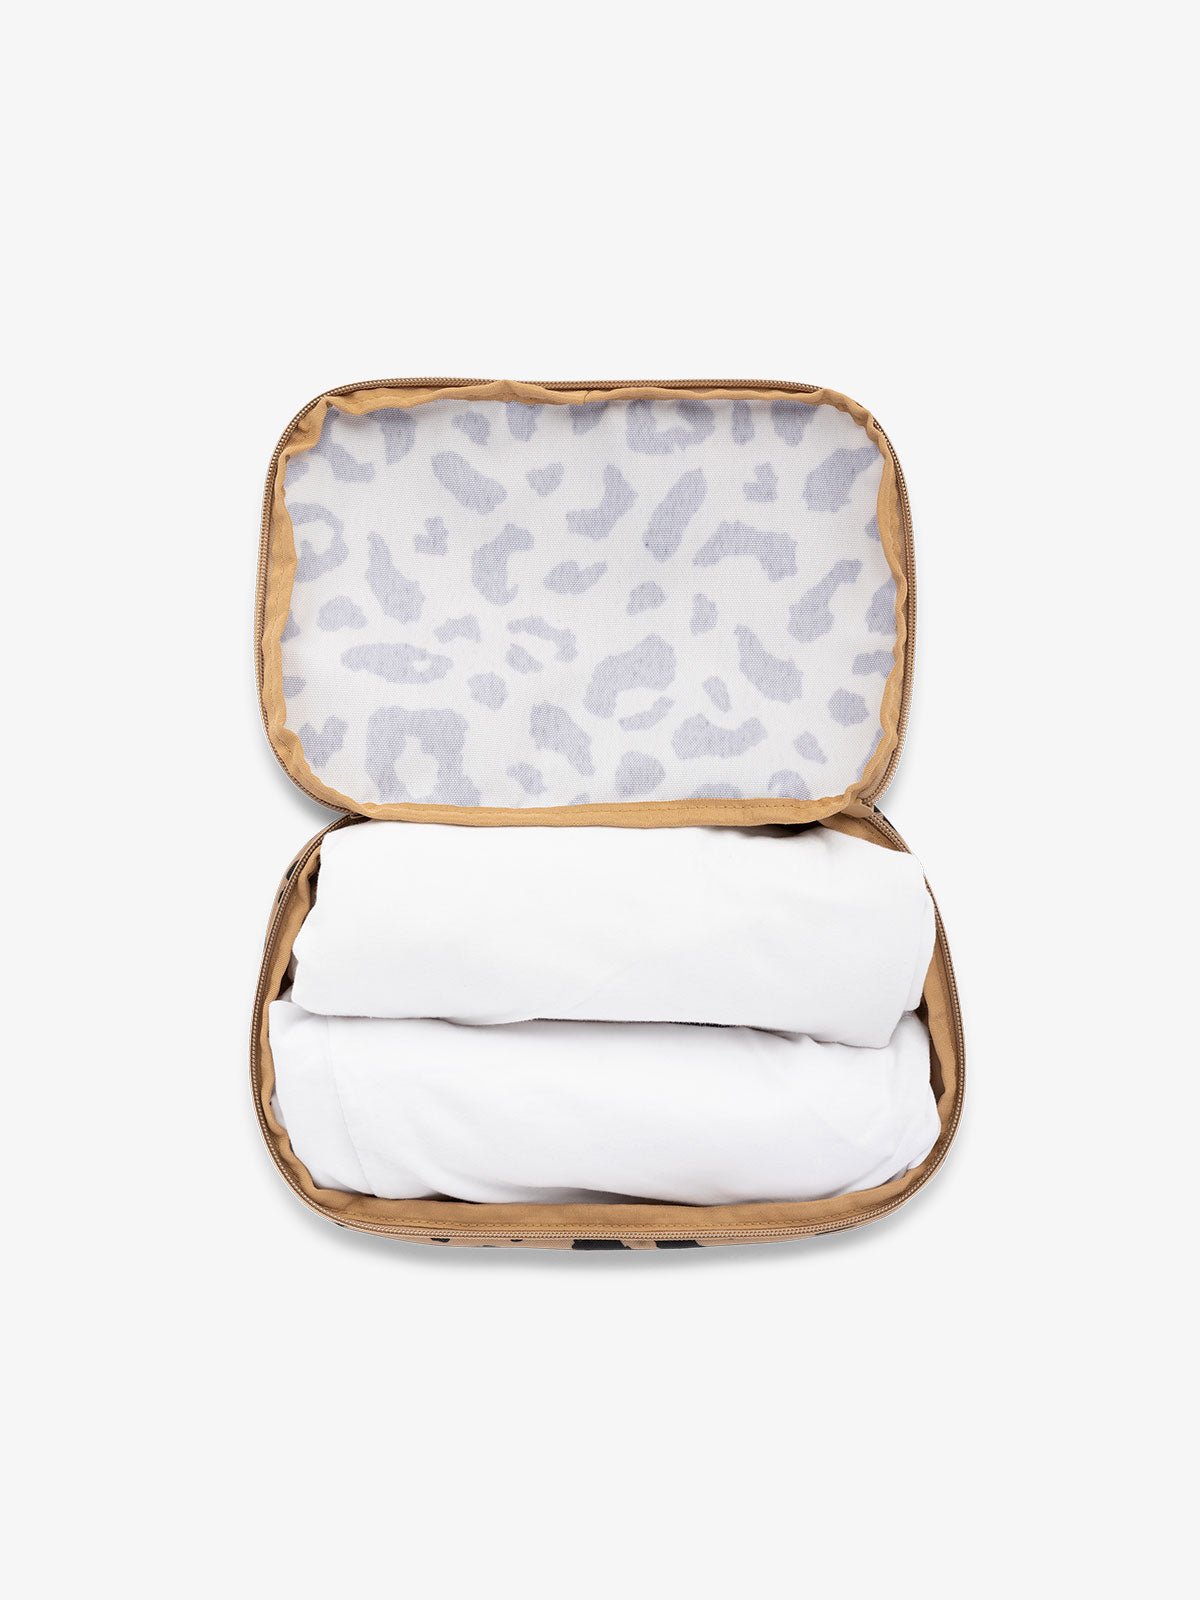 CALPAK small packing cubes for travel made with durable material in cheetah